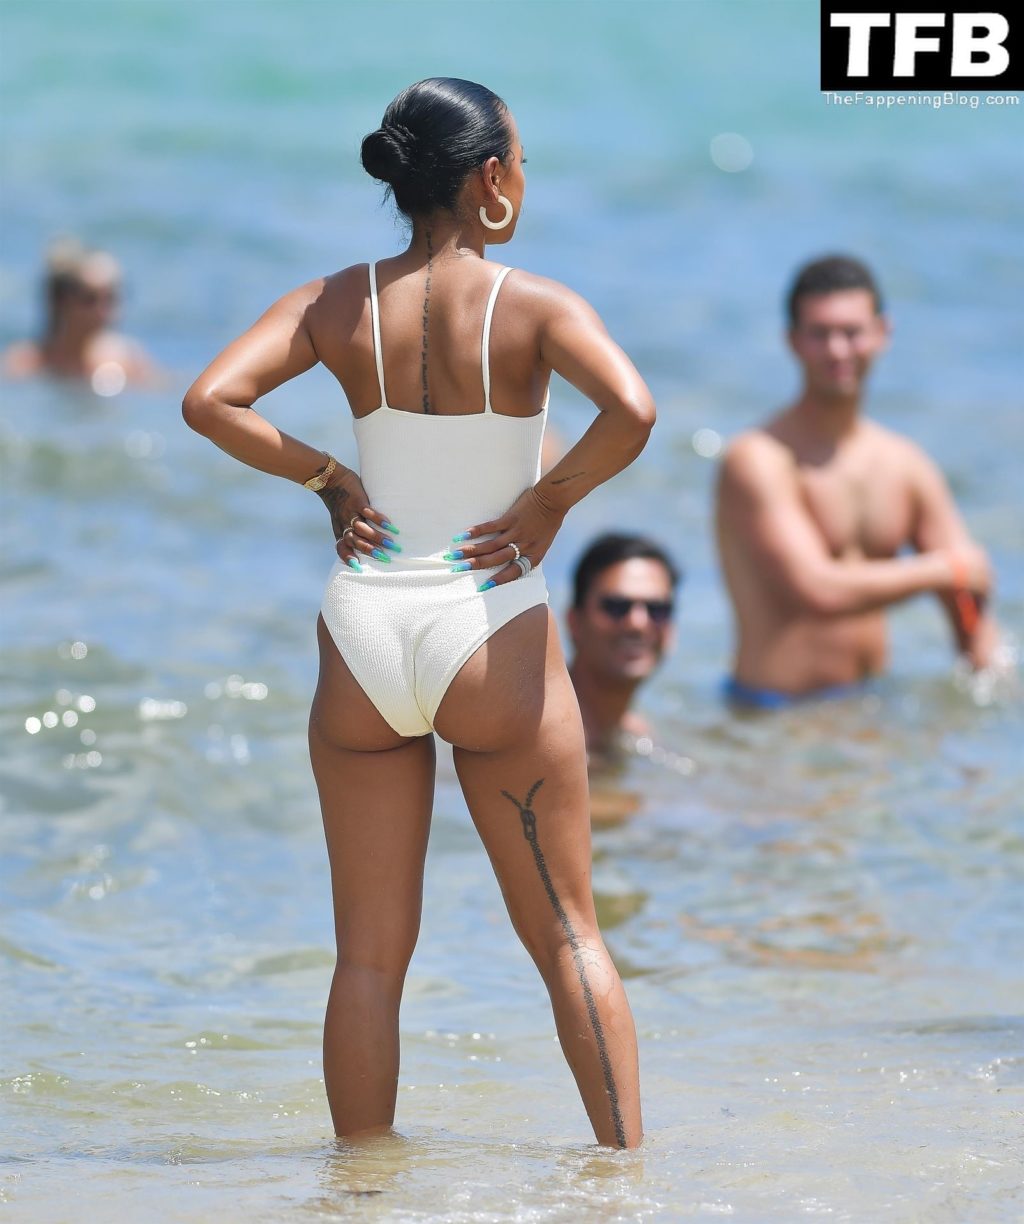 Karrueche Tran Sexy The Fappening Blog 13 1024x1224 - Karrueche Tran Looks Incredible in a White Swimsuit on the Beach in Miami (45 Photos)